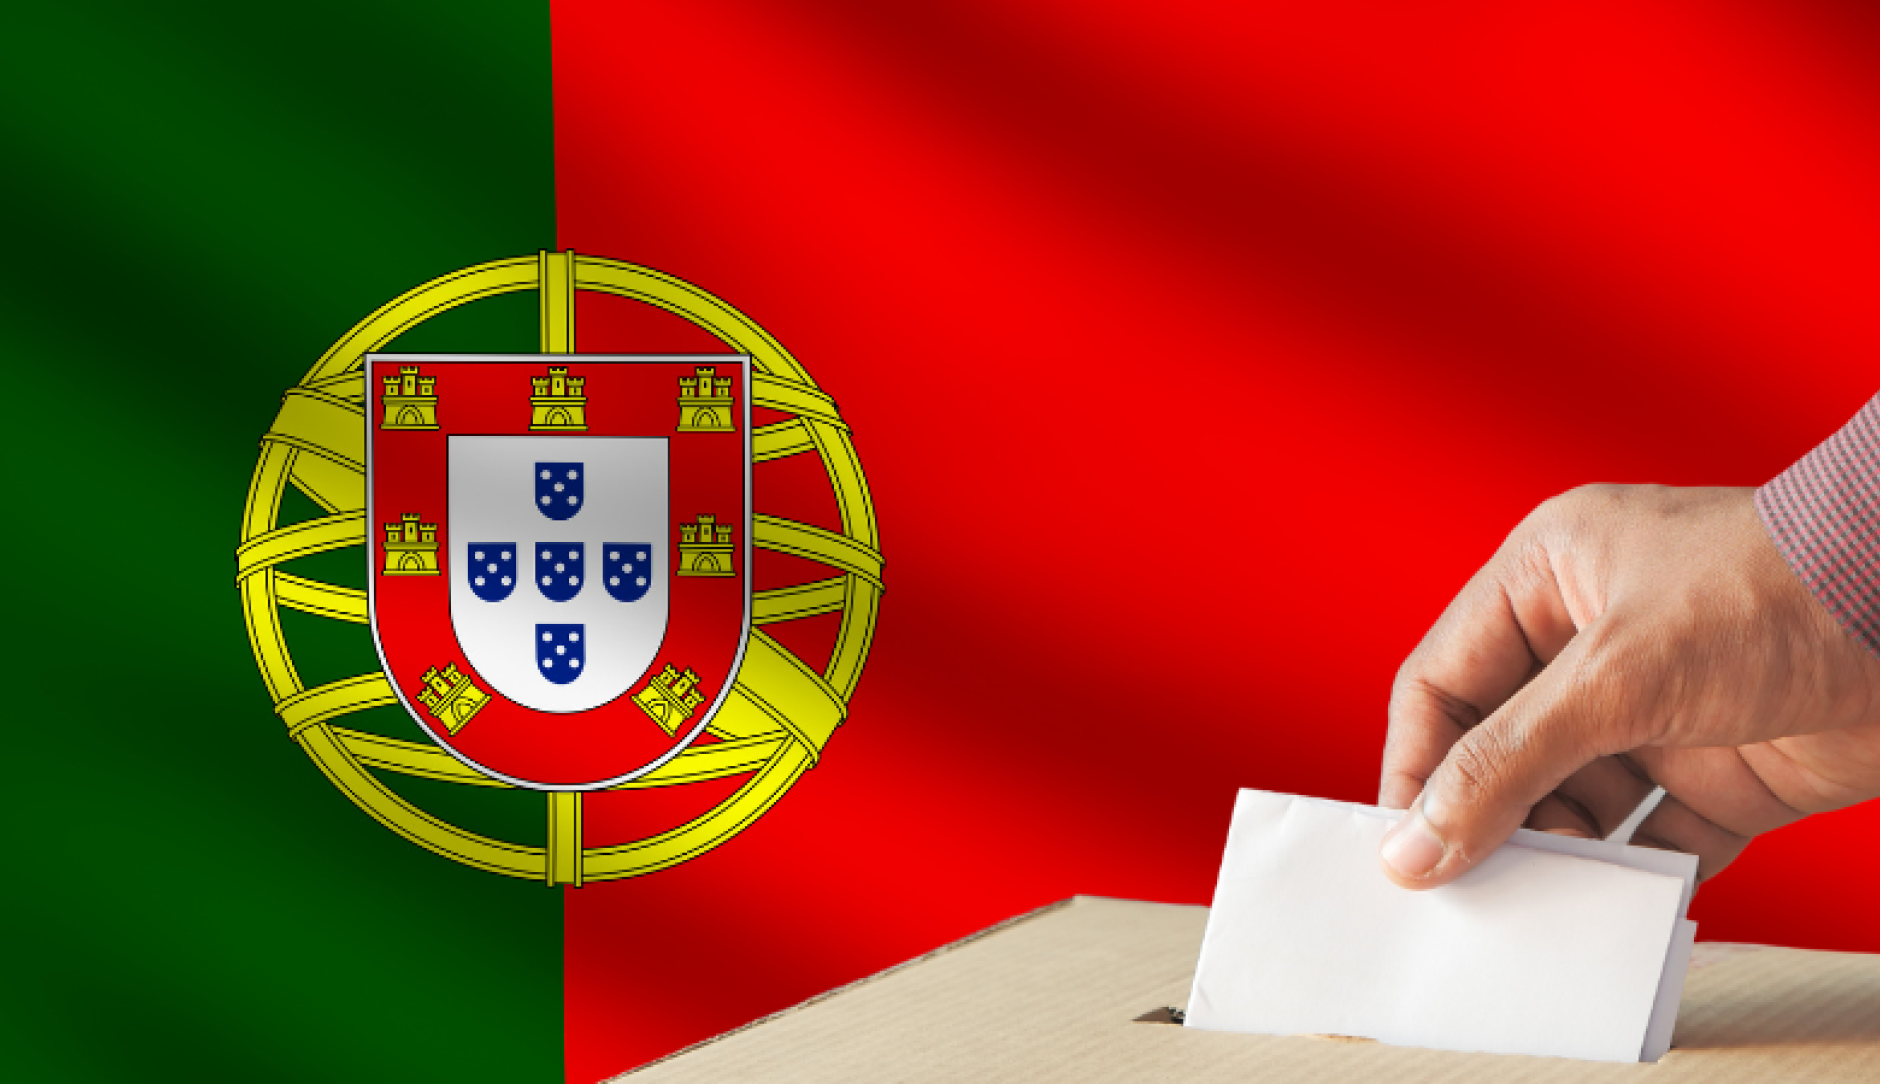 A Portuguese flag behind a person casting a vote